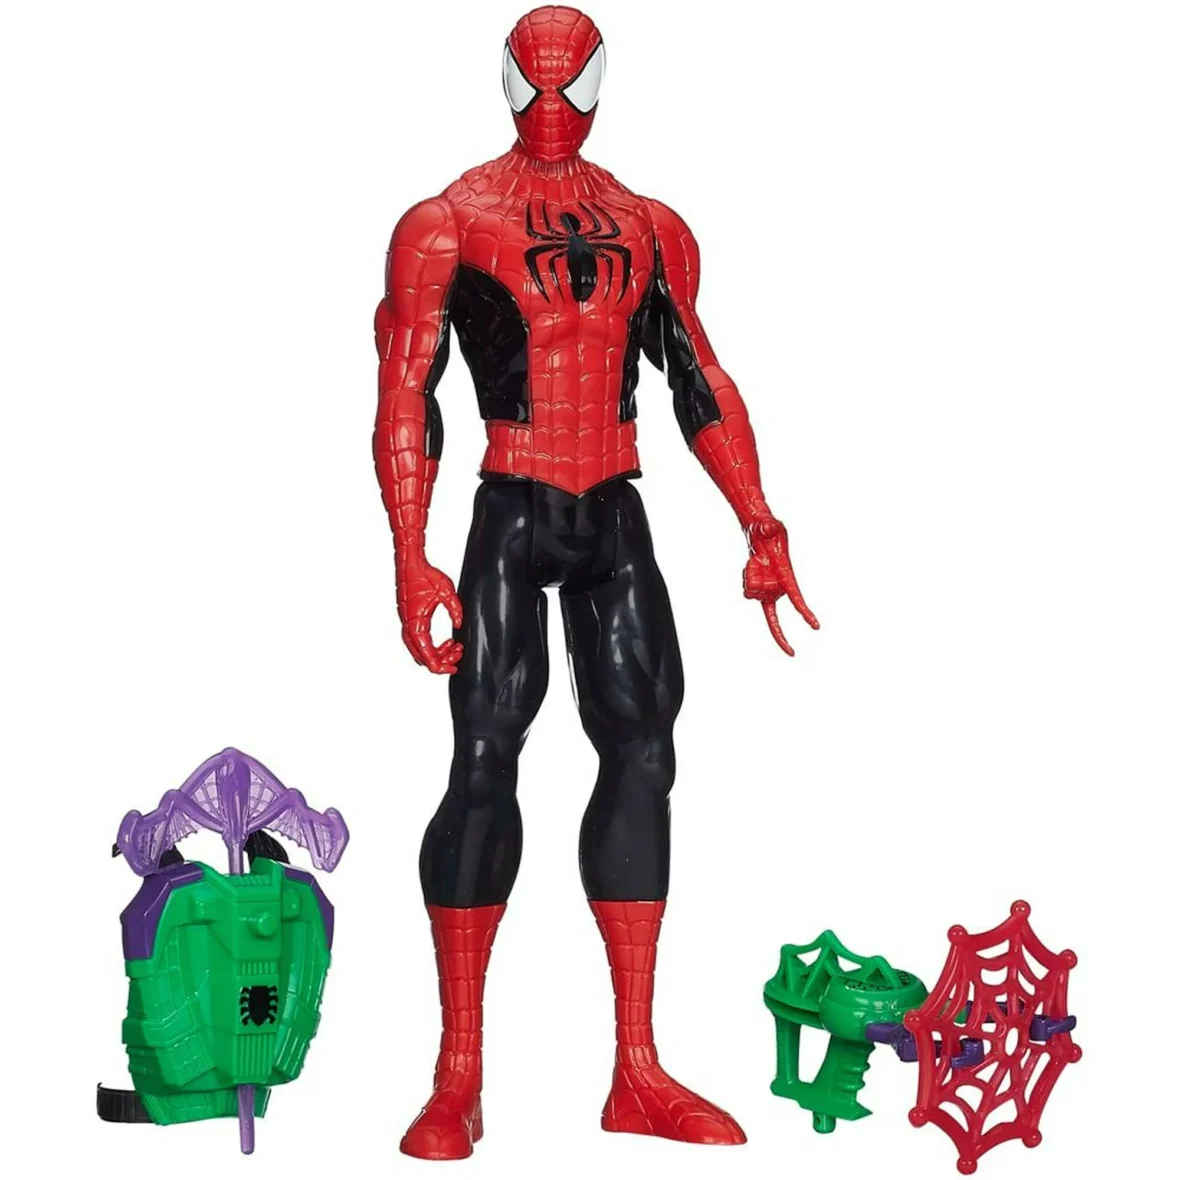 Spiderman Titan Heroes Series Action Figure with Goblin Attack Gear